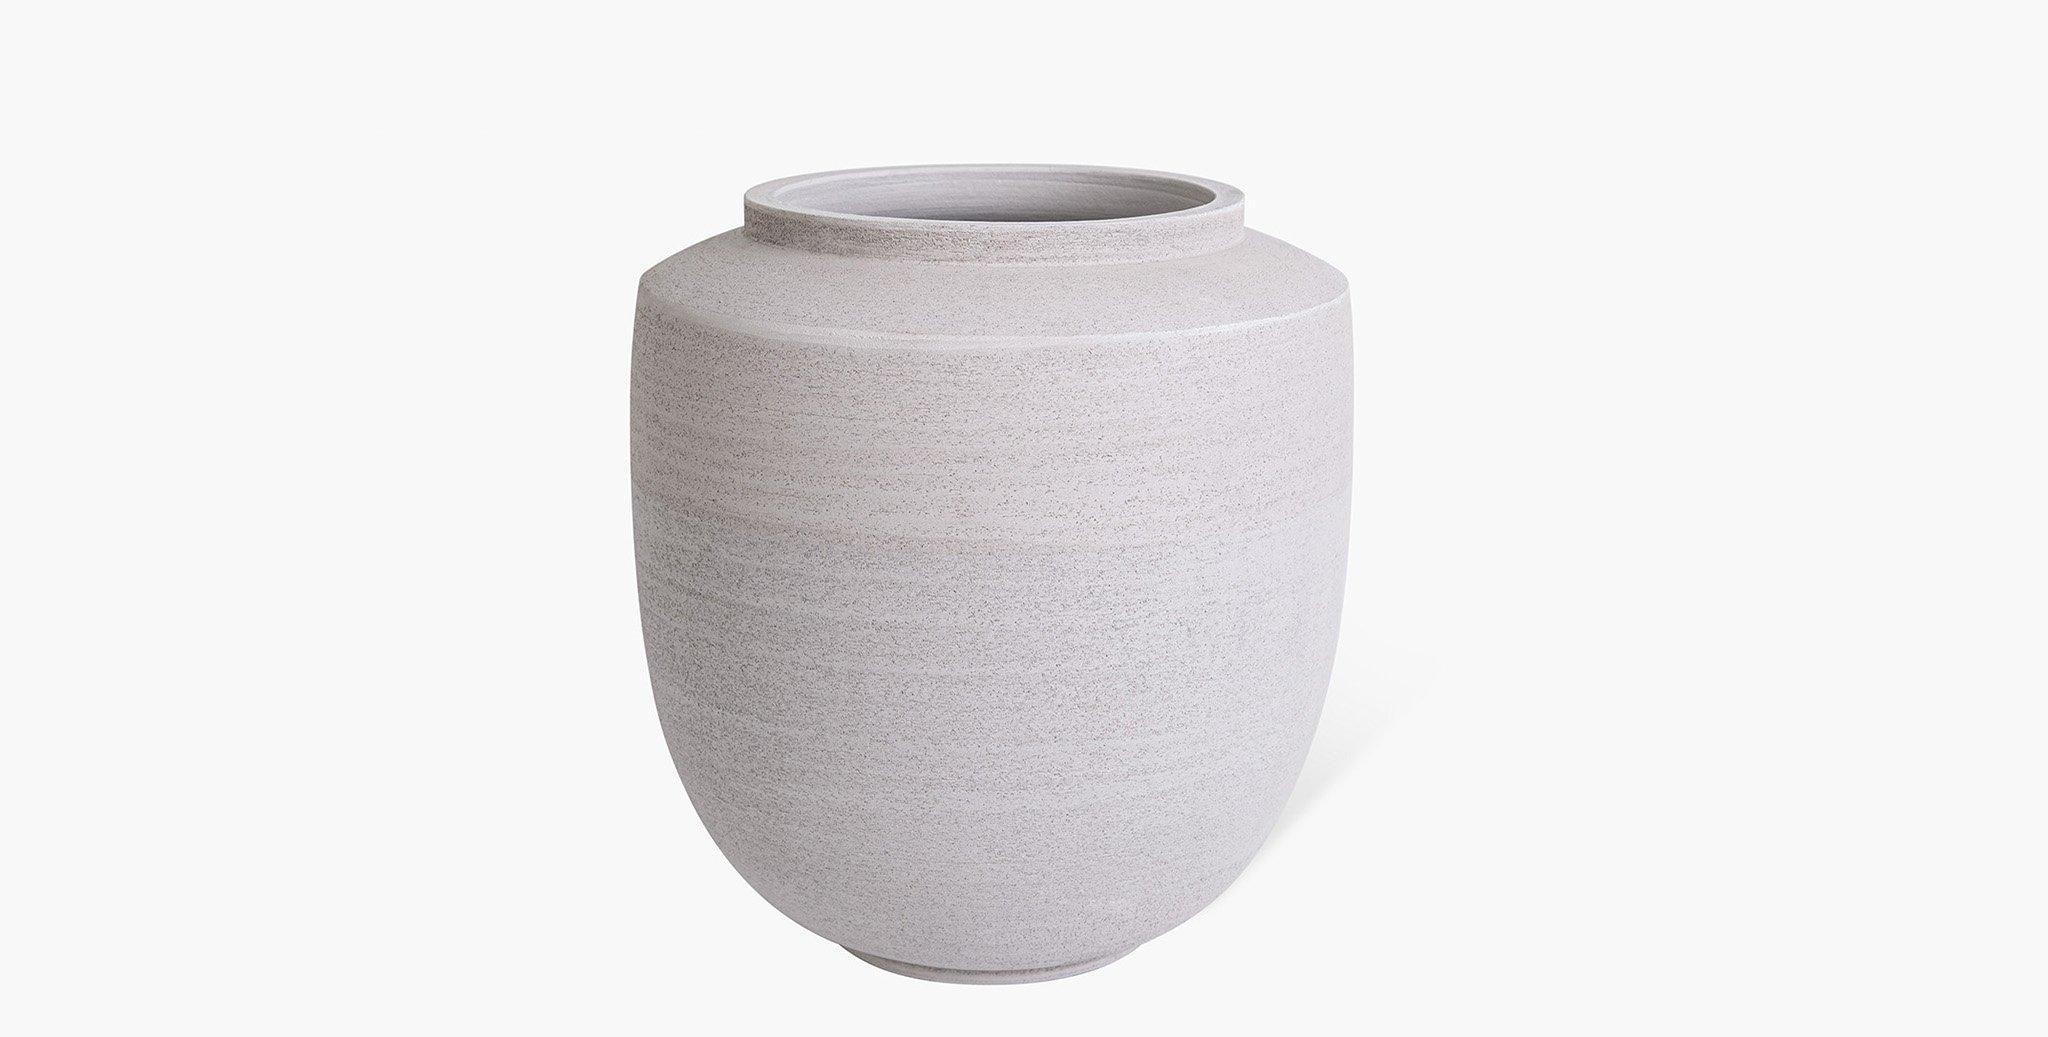 The Aeron Stoneware Vase Collection is the sublime meeting of form and function. Classic silhouettes are transformed in Stoneware clay into their most simplest form while maintaining a bold presence. A neutral earth palette was chosen to highlight